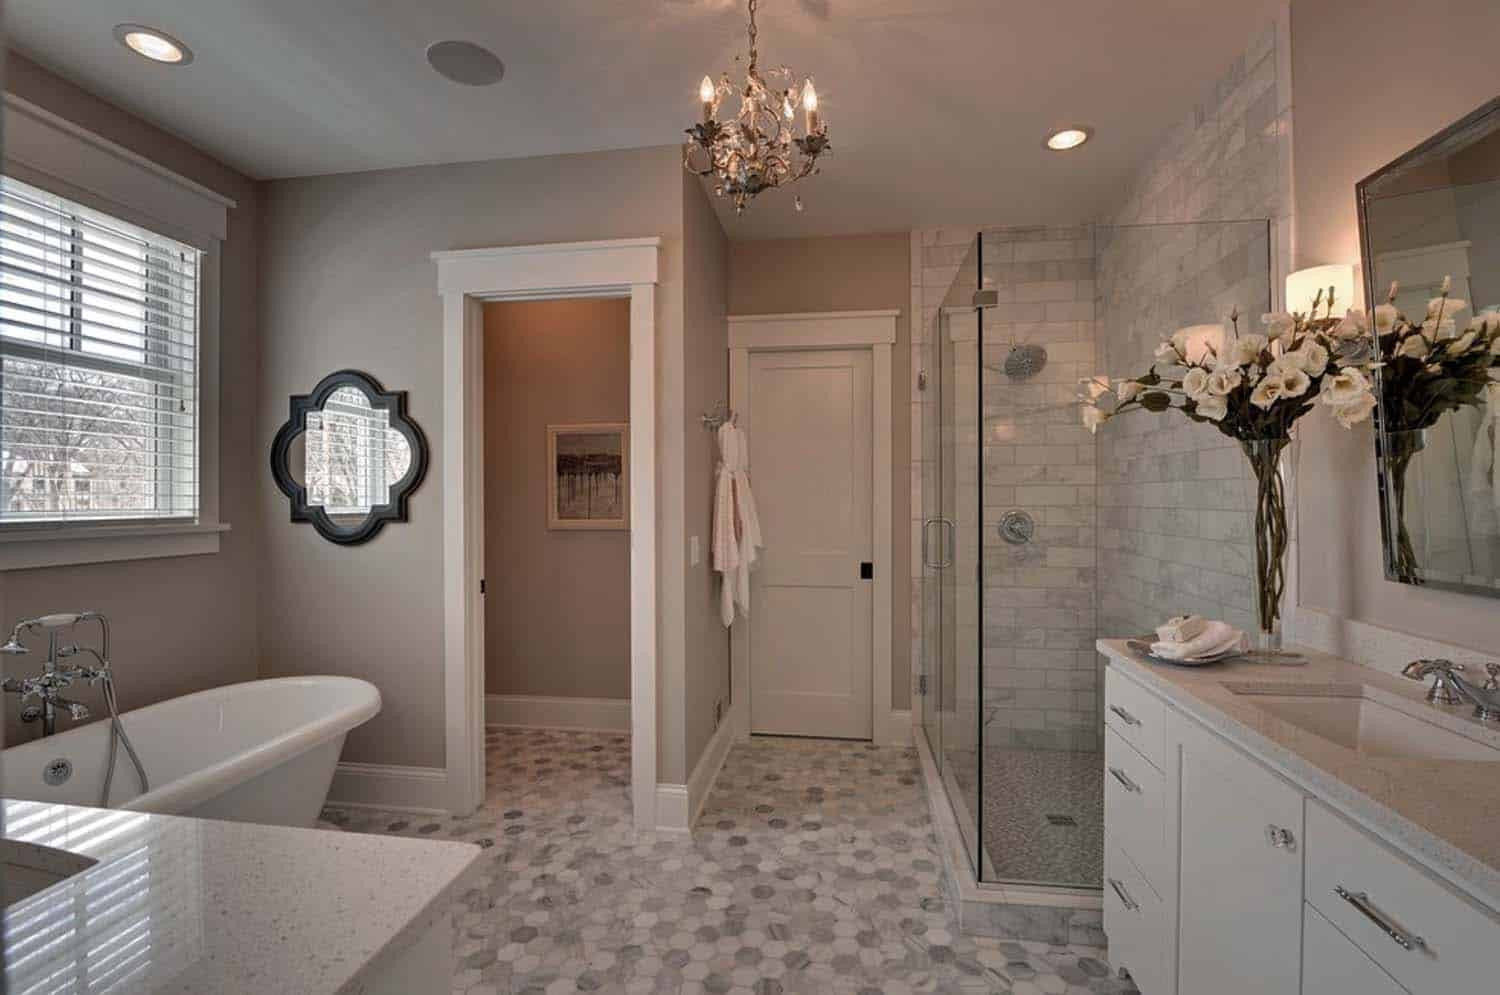 Bathroom Remodeling Ideas
 53 Most fabulous traditional style bathroom designs ever